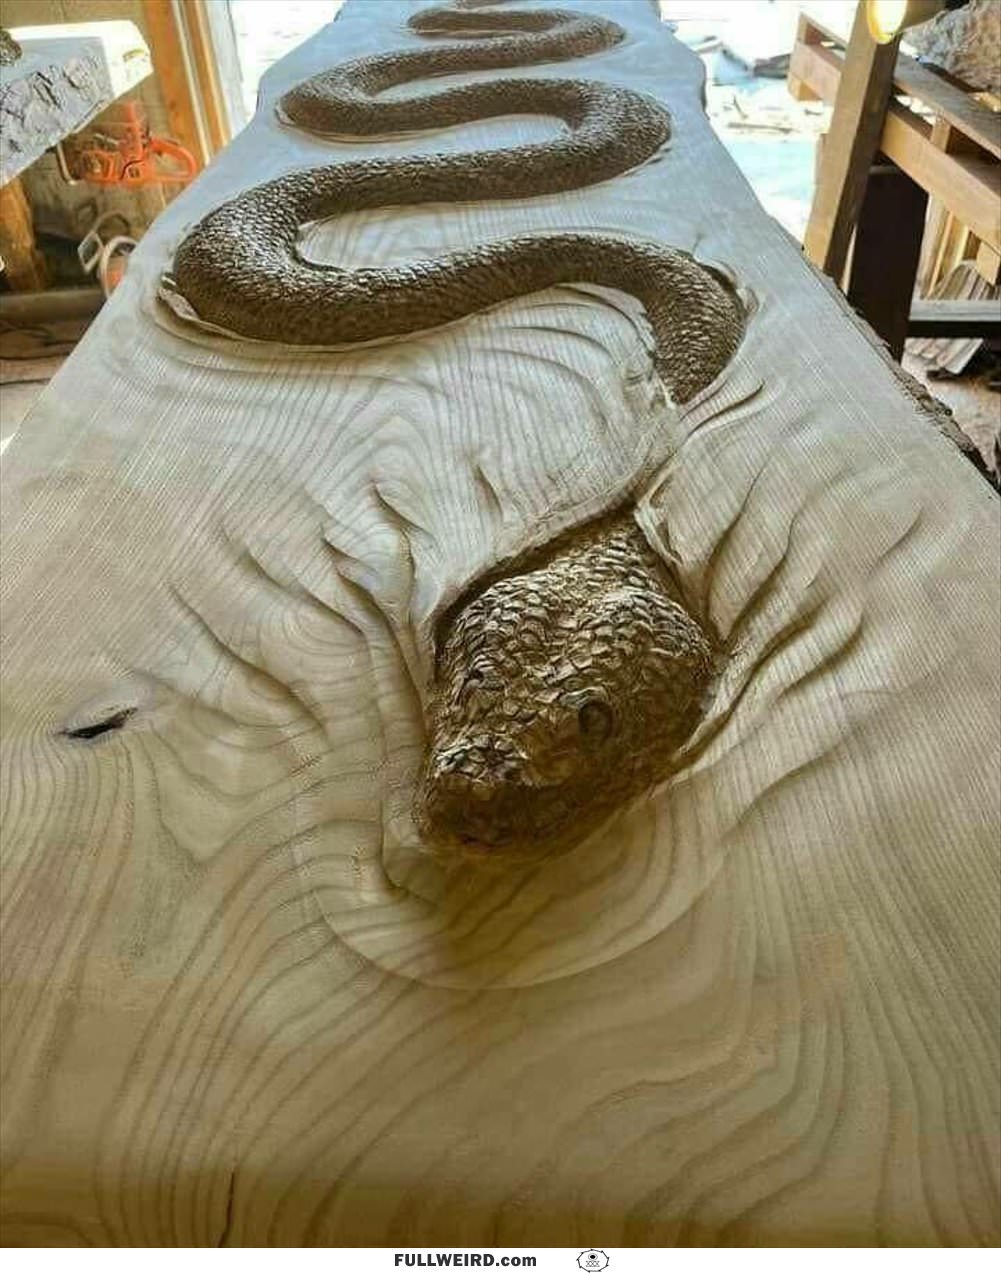 That Is A Cool Table